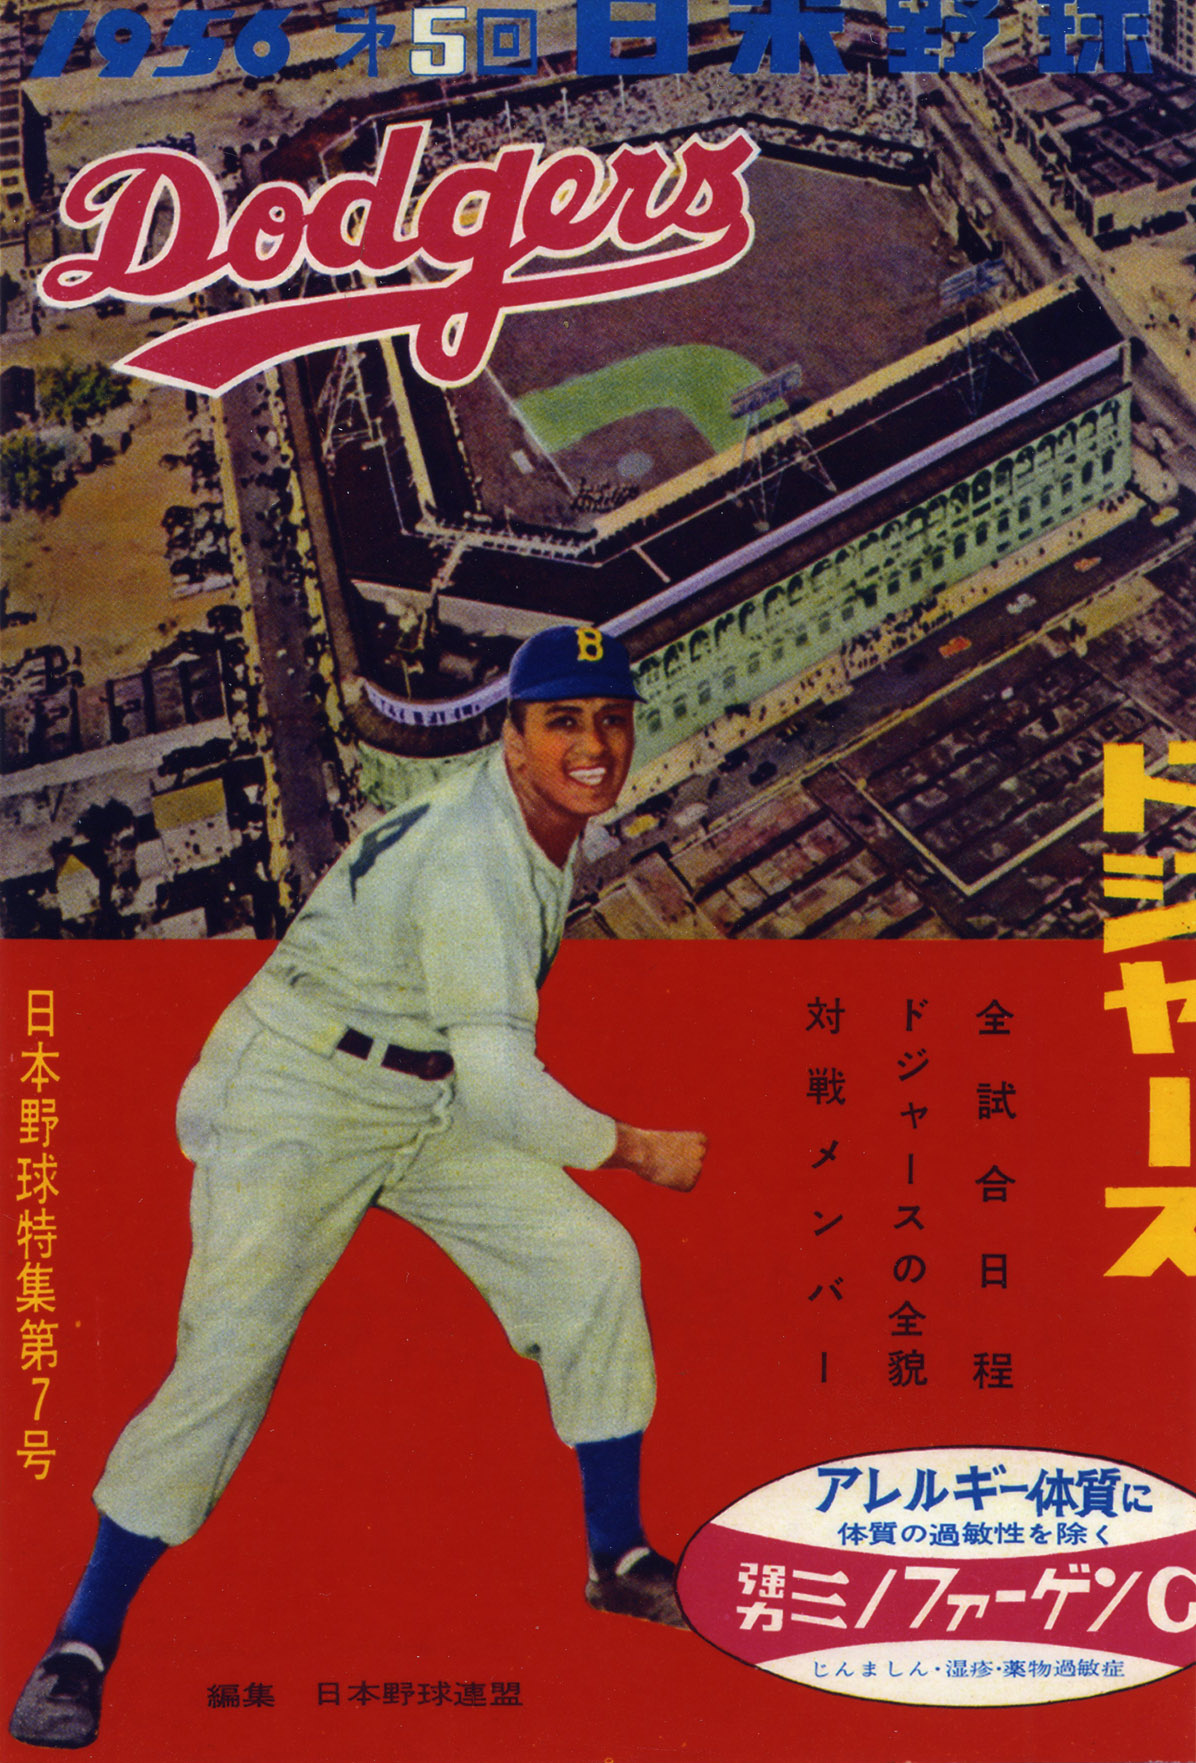 The Dodgers' Japan Connections: From the 1956 Japan Tour to Hideo Nomo -  Discover Nikkei